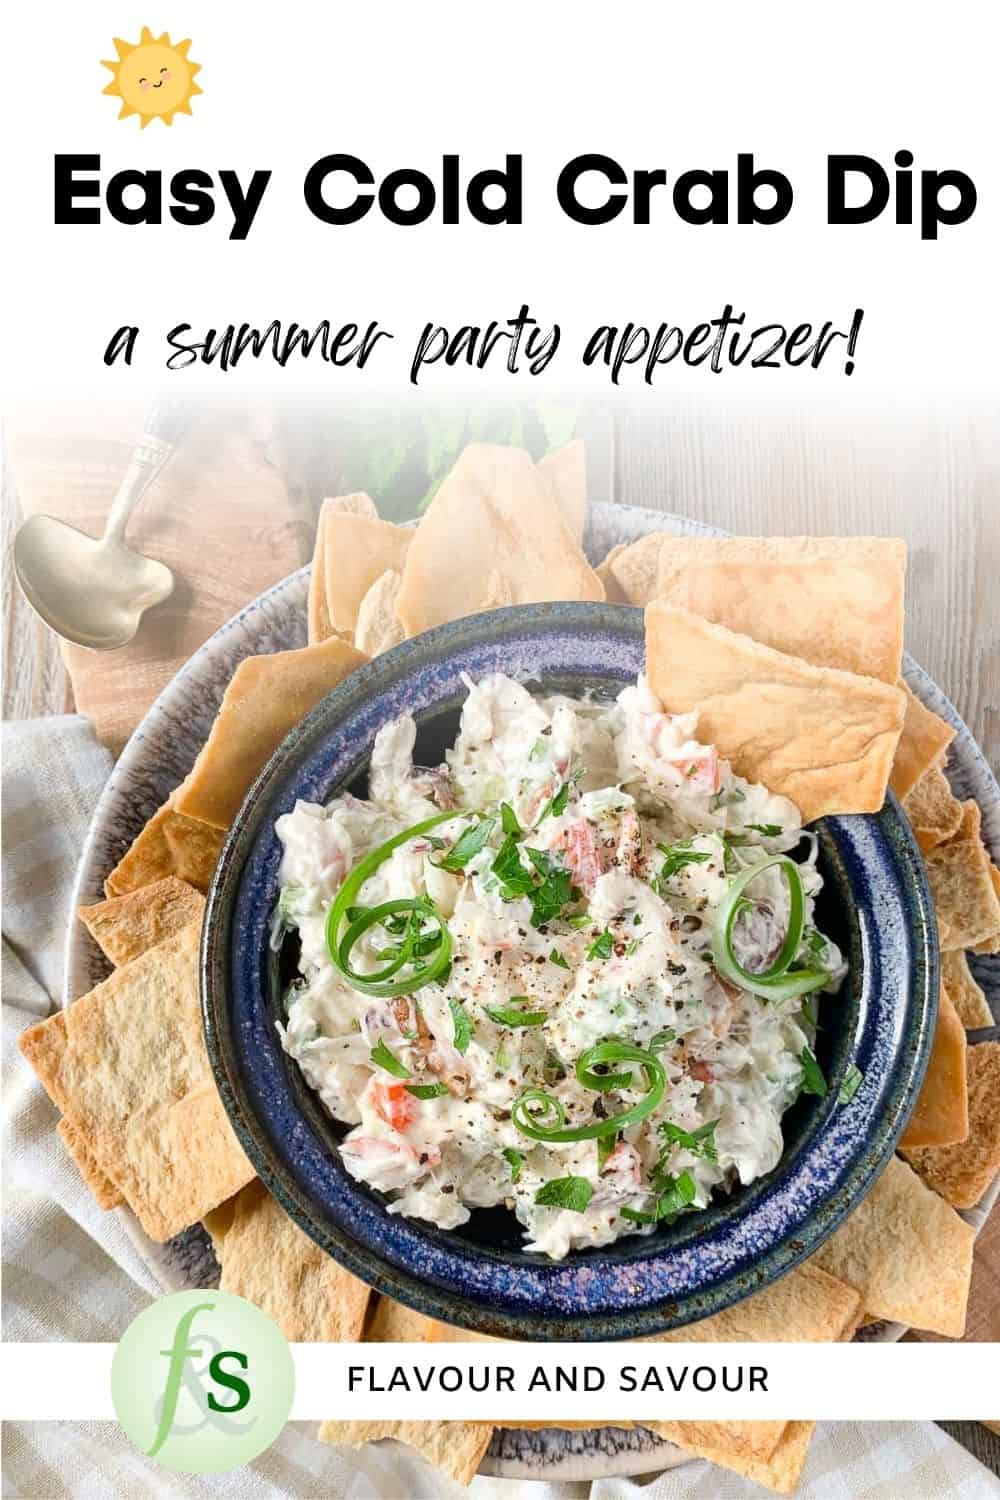 Image with text for easy cold crab dip with cream cheese.